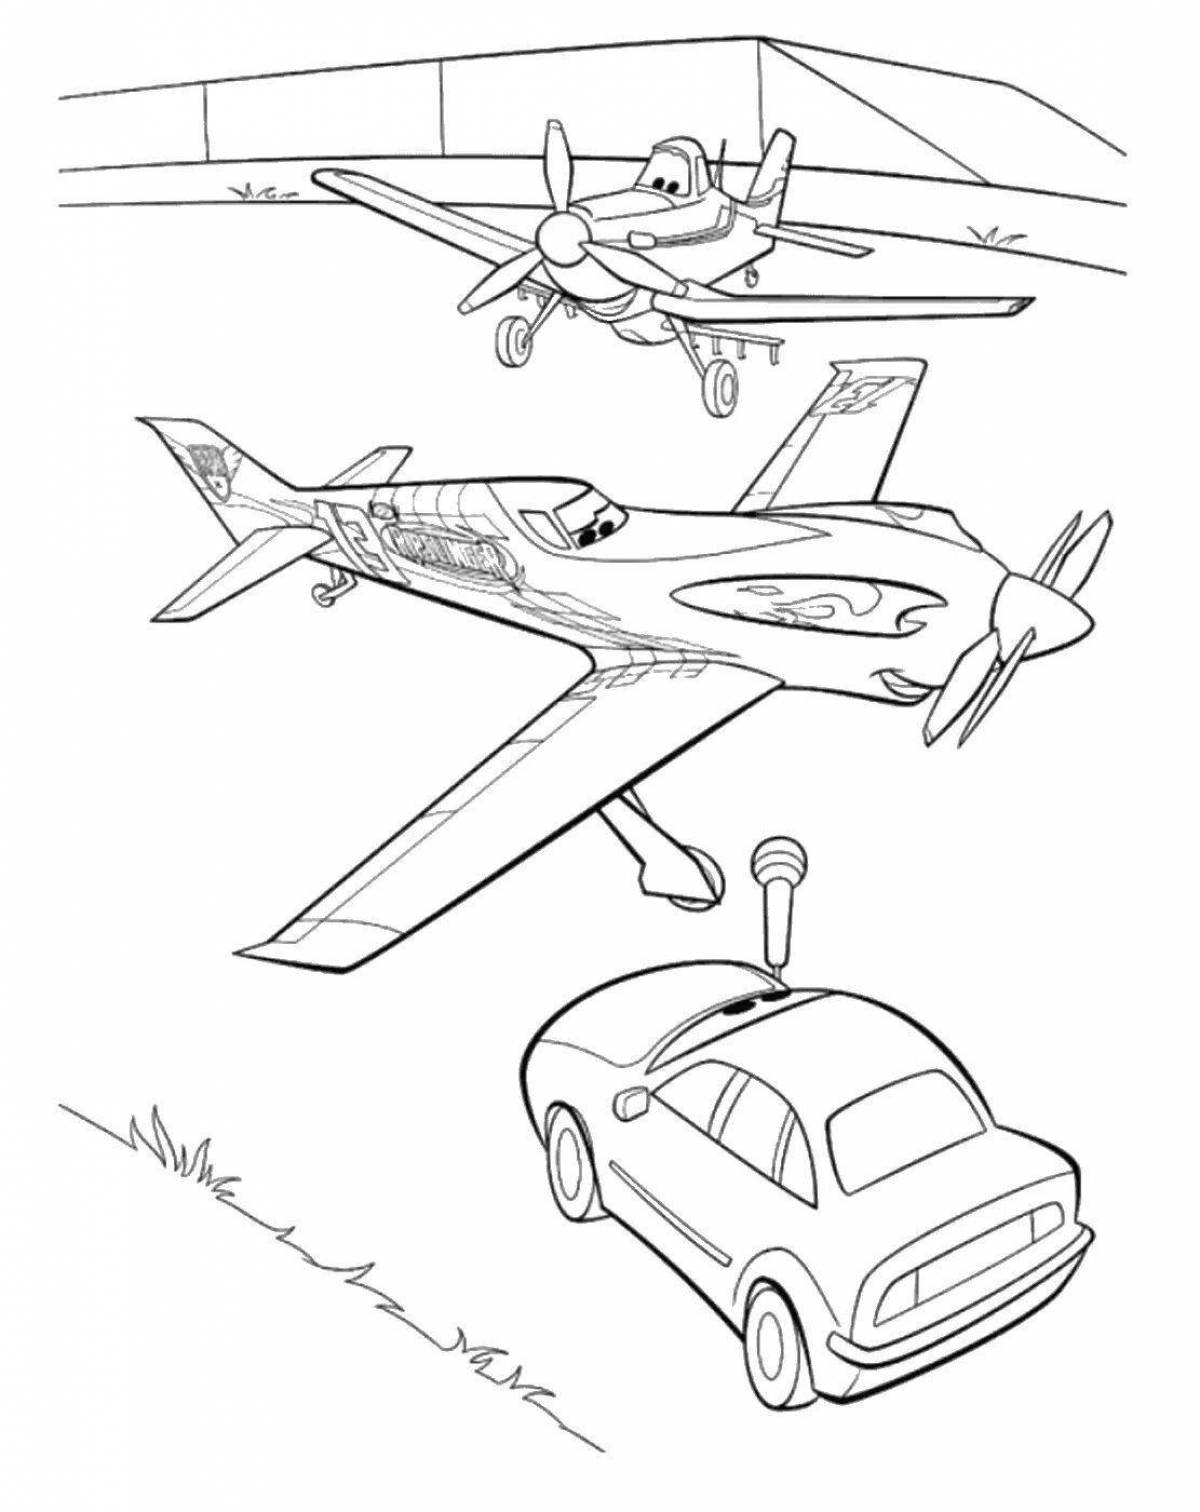 Playful car plane coloring page